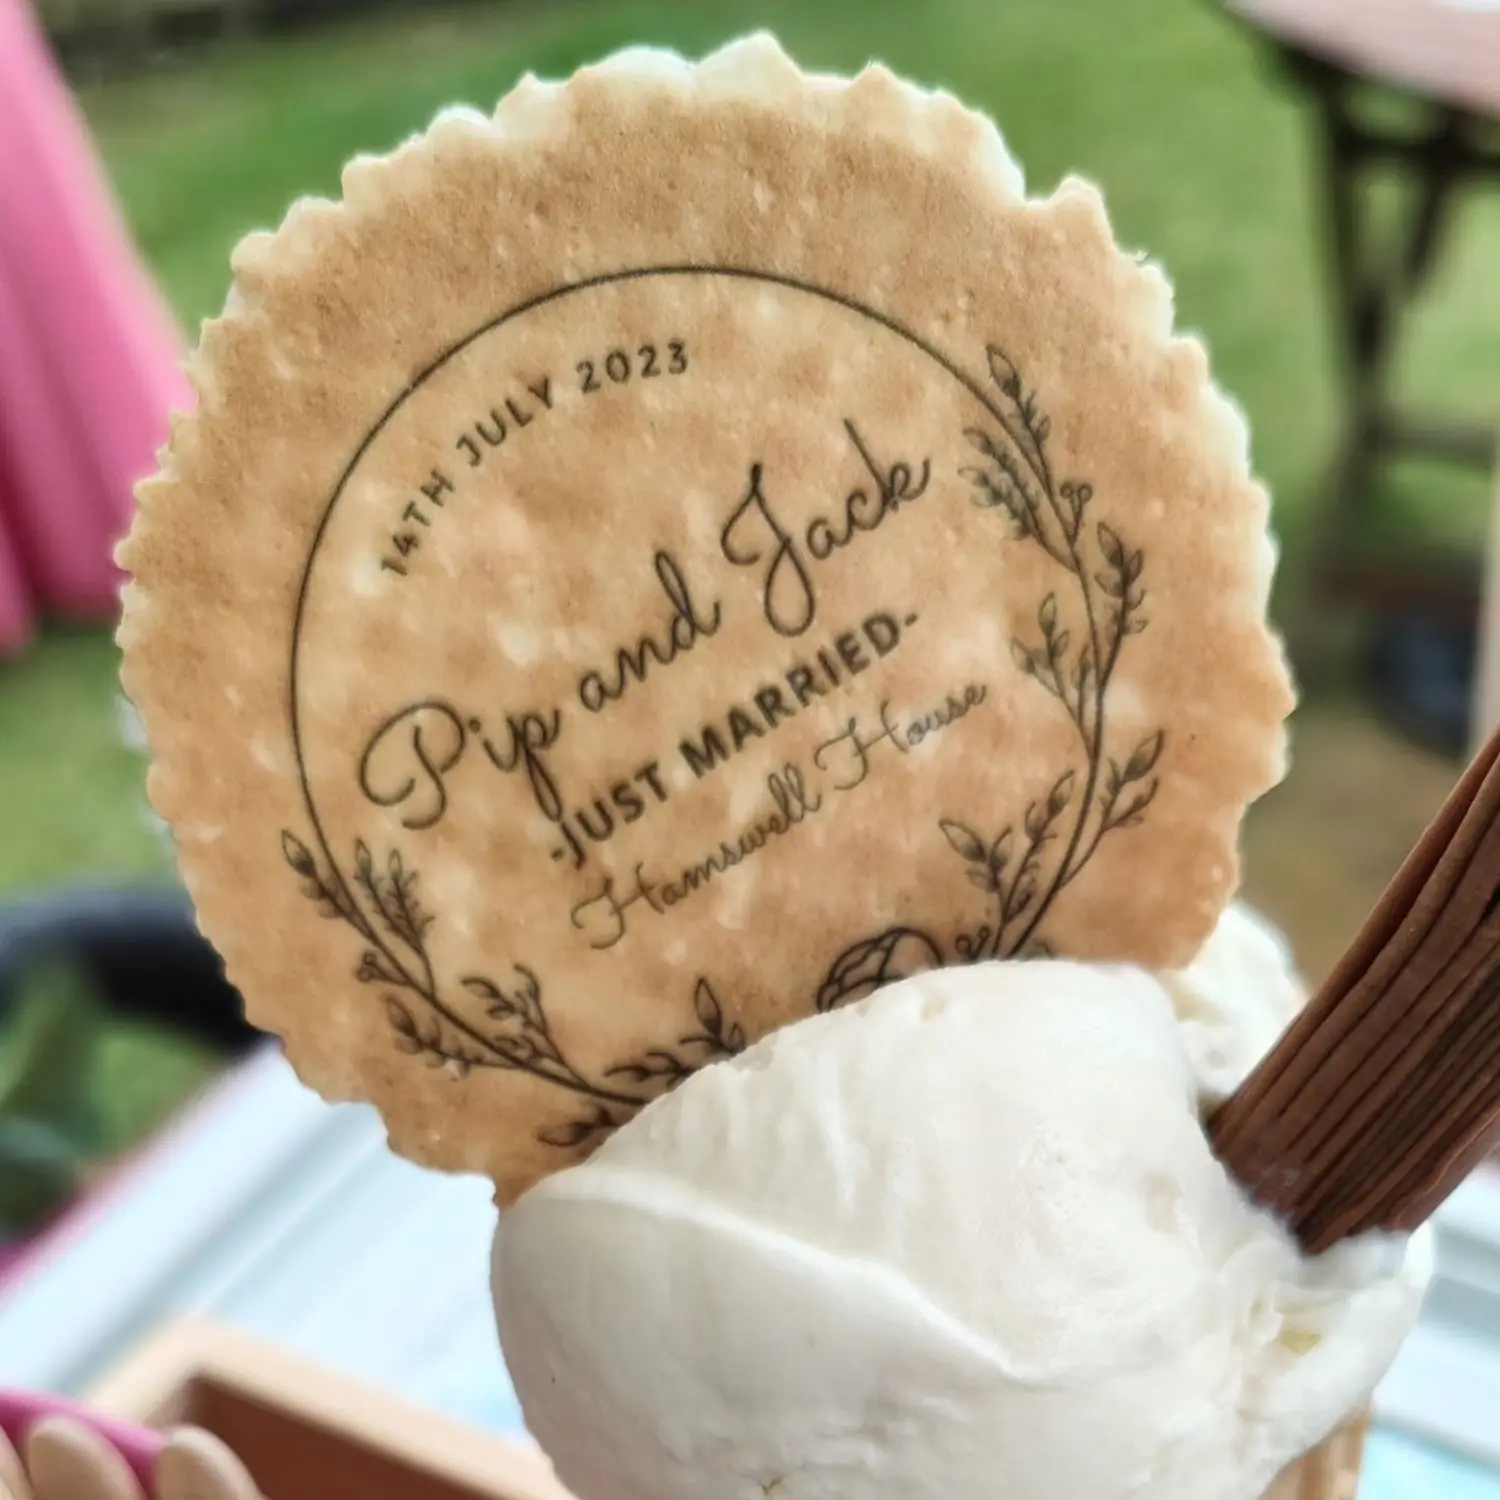 personalized Sevanetti wafers with ice cream